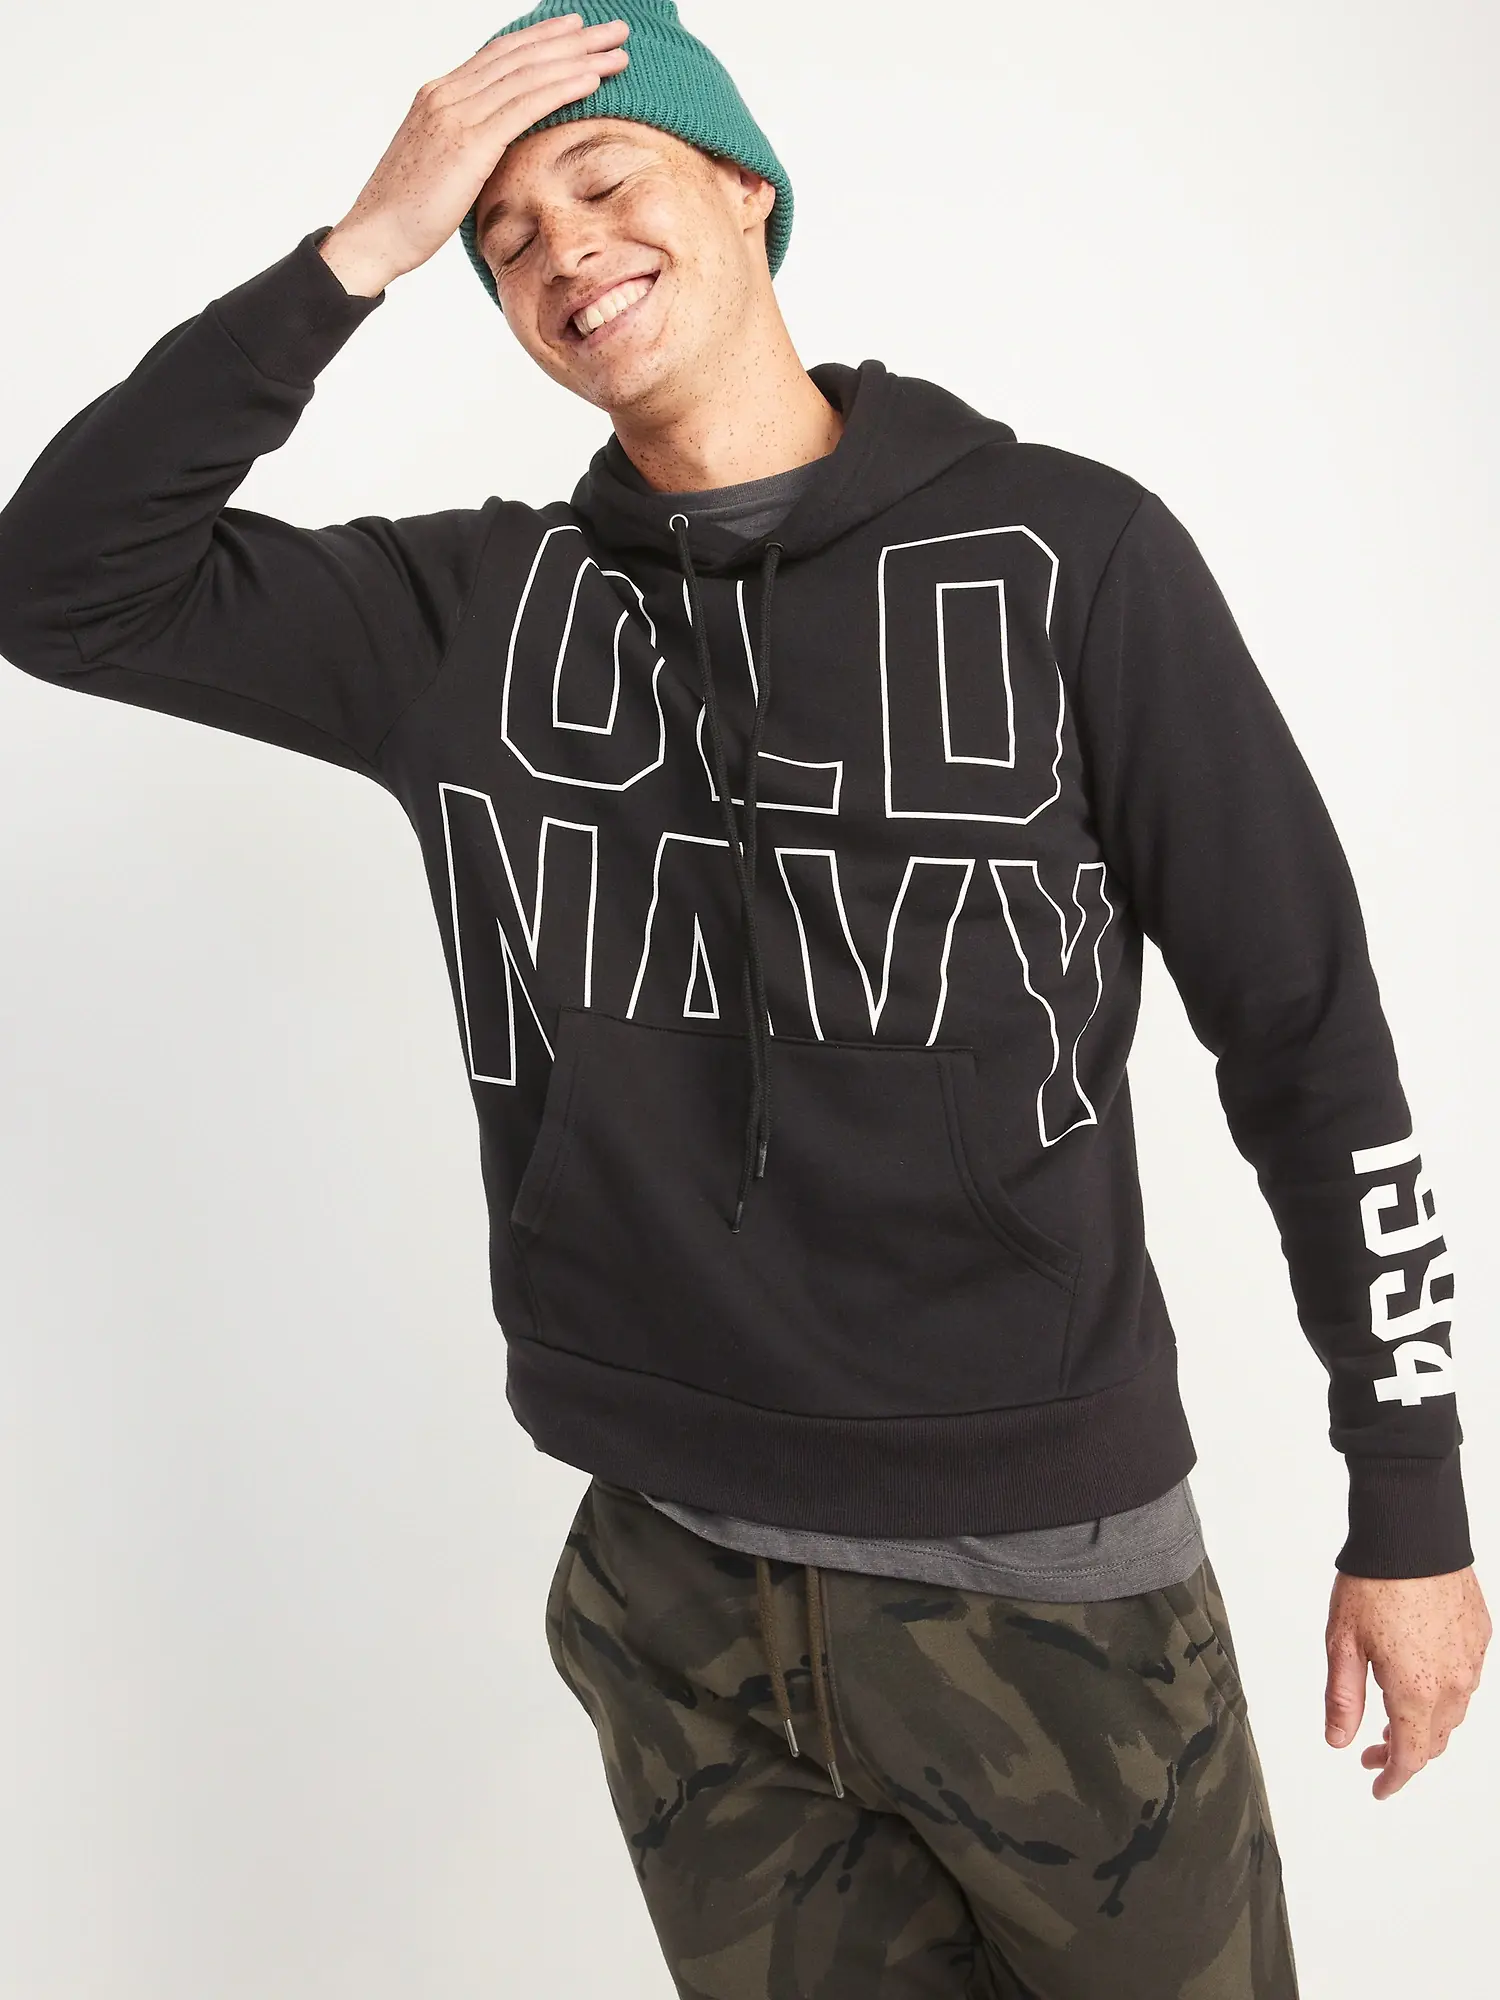 Old Navy Logo-Graphic Pullover Hoodie for Men black. 1